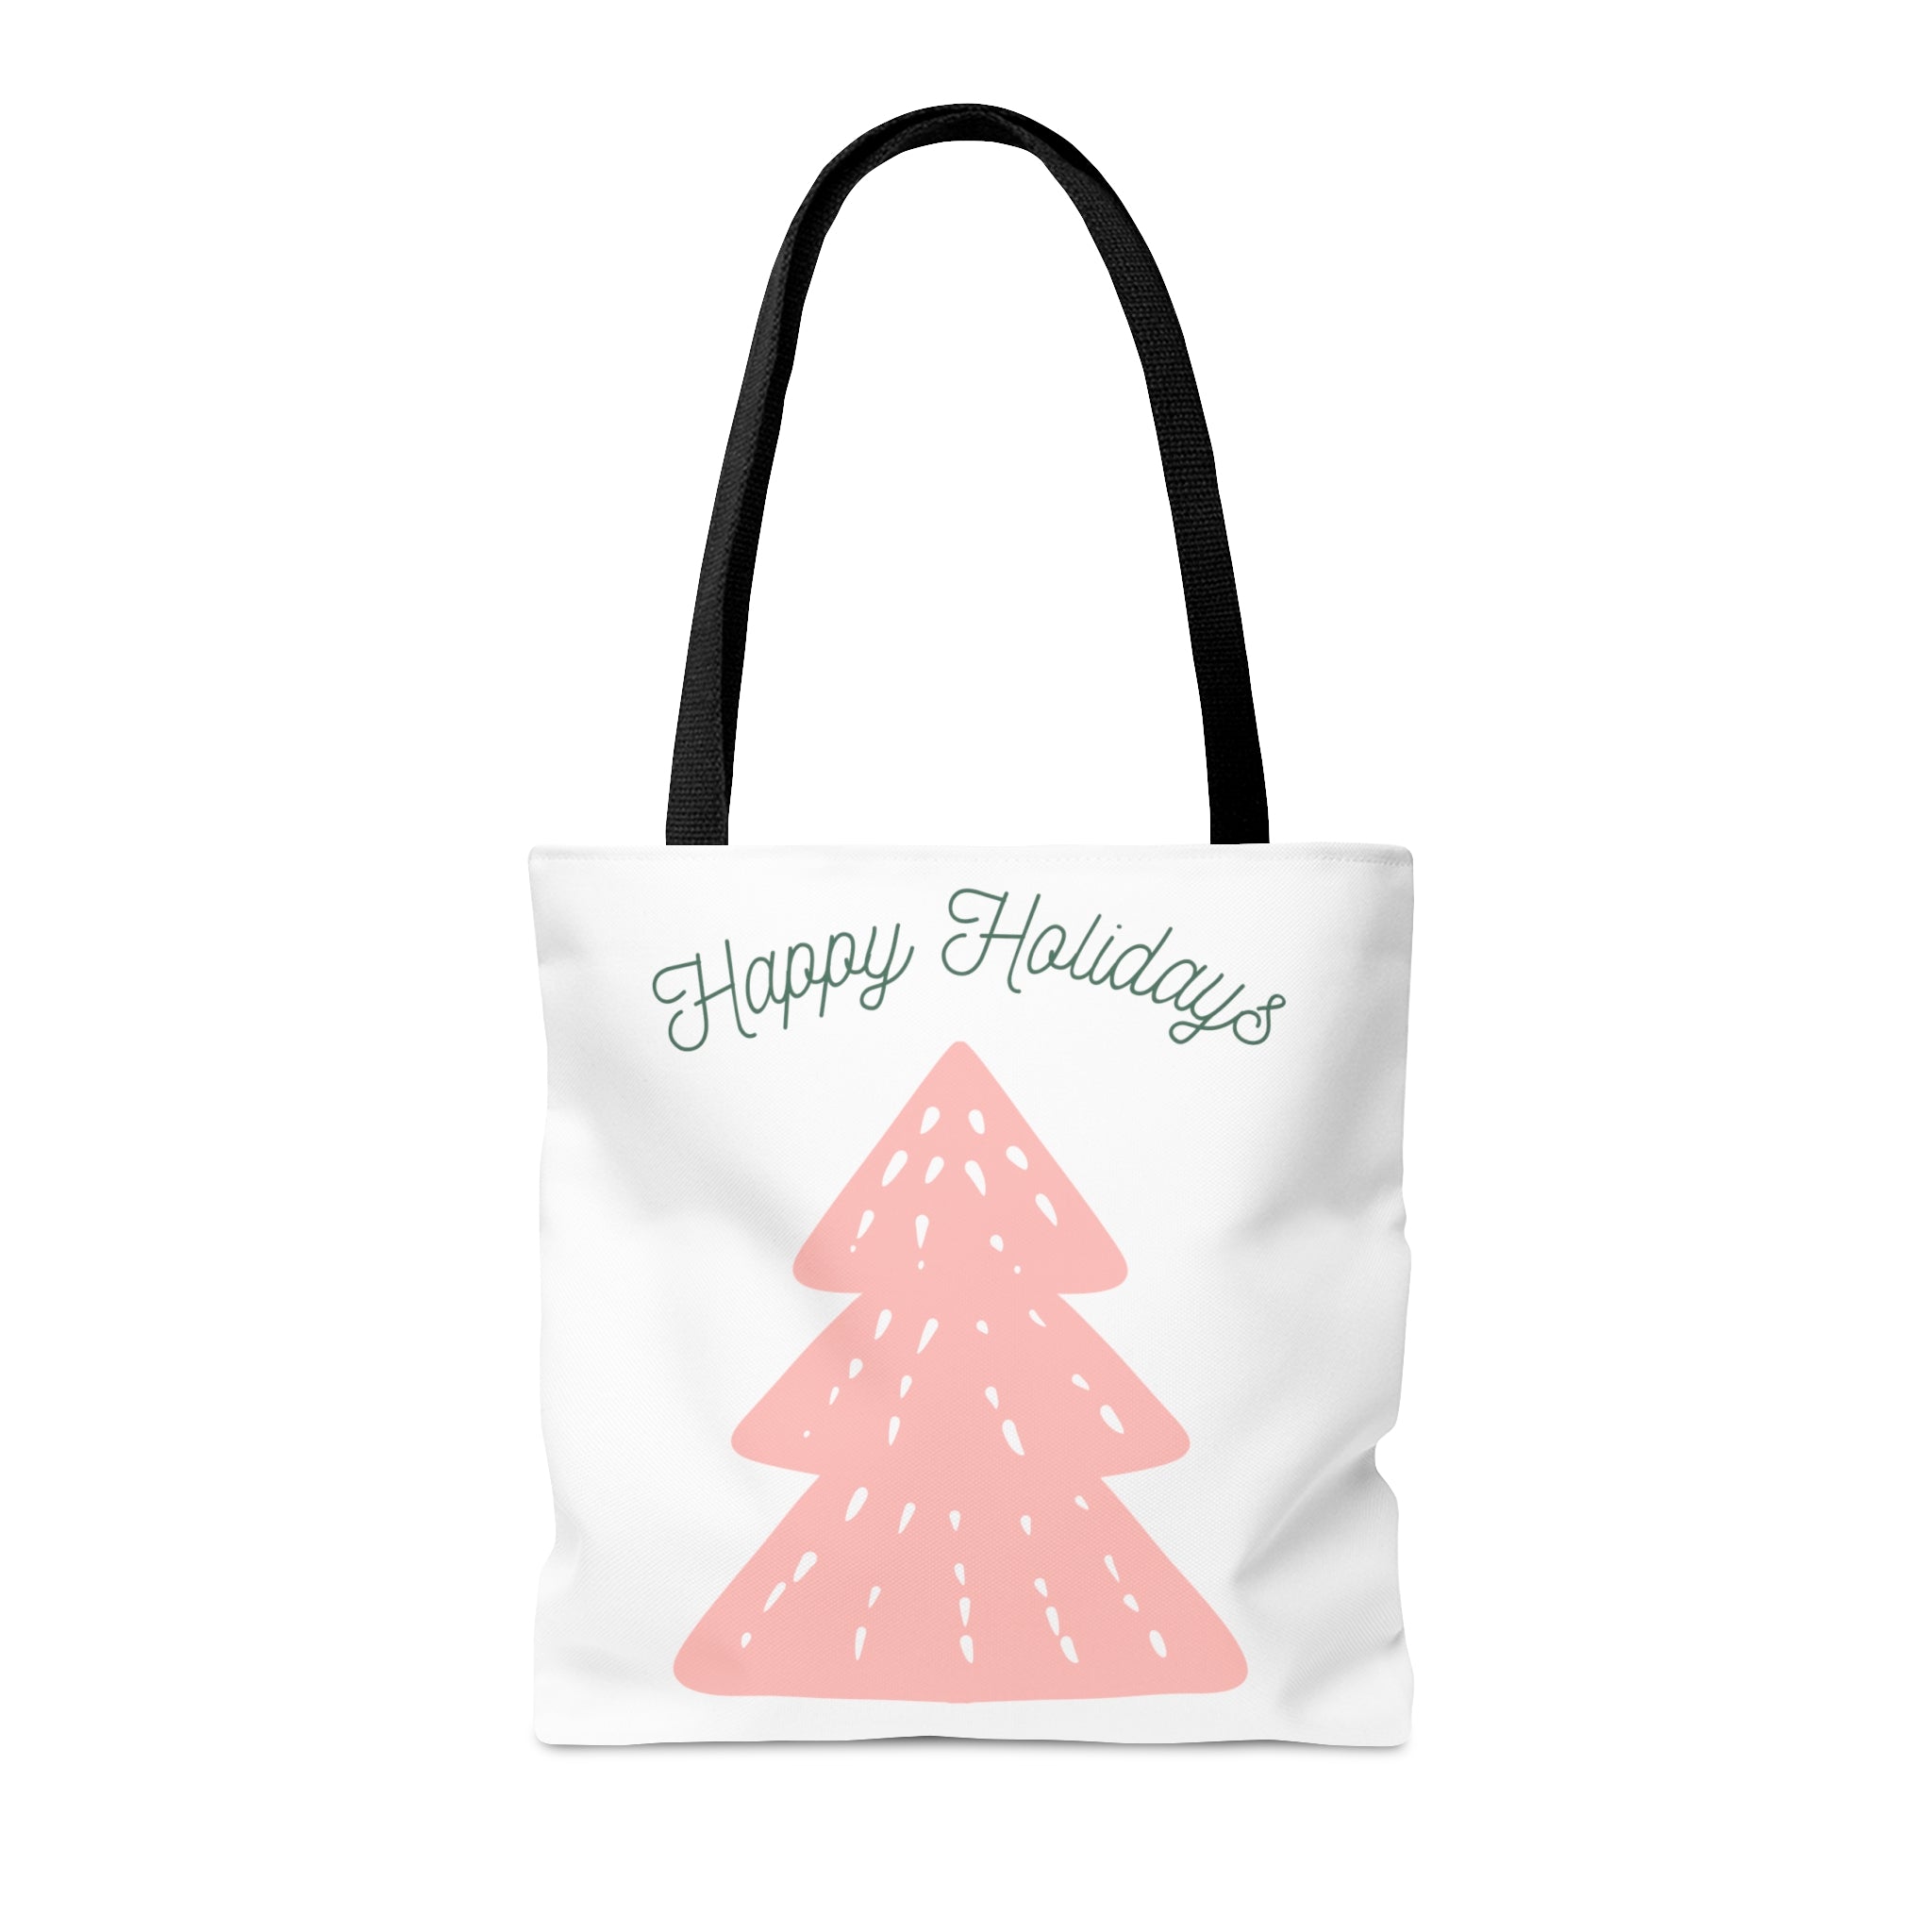 Happy Holiday Tote Bag, Reusable Canvas Tote Bags, Available in Different Size